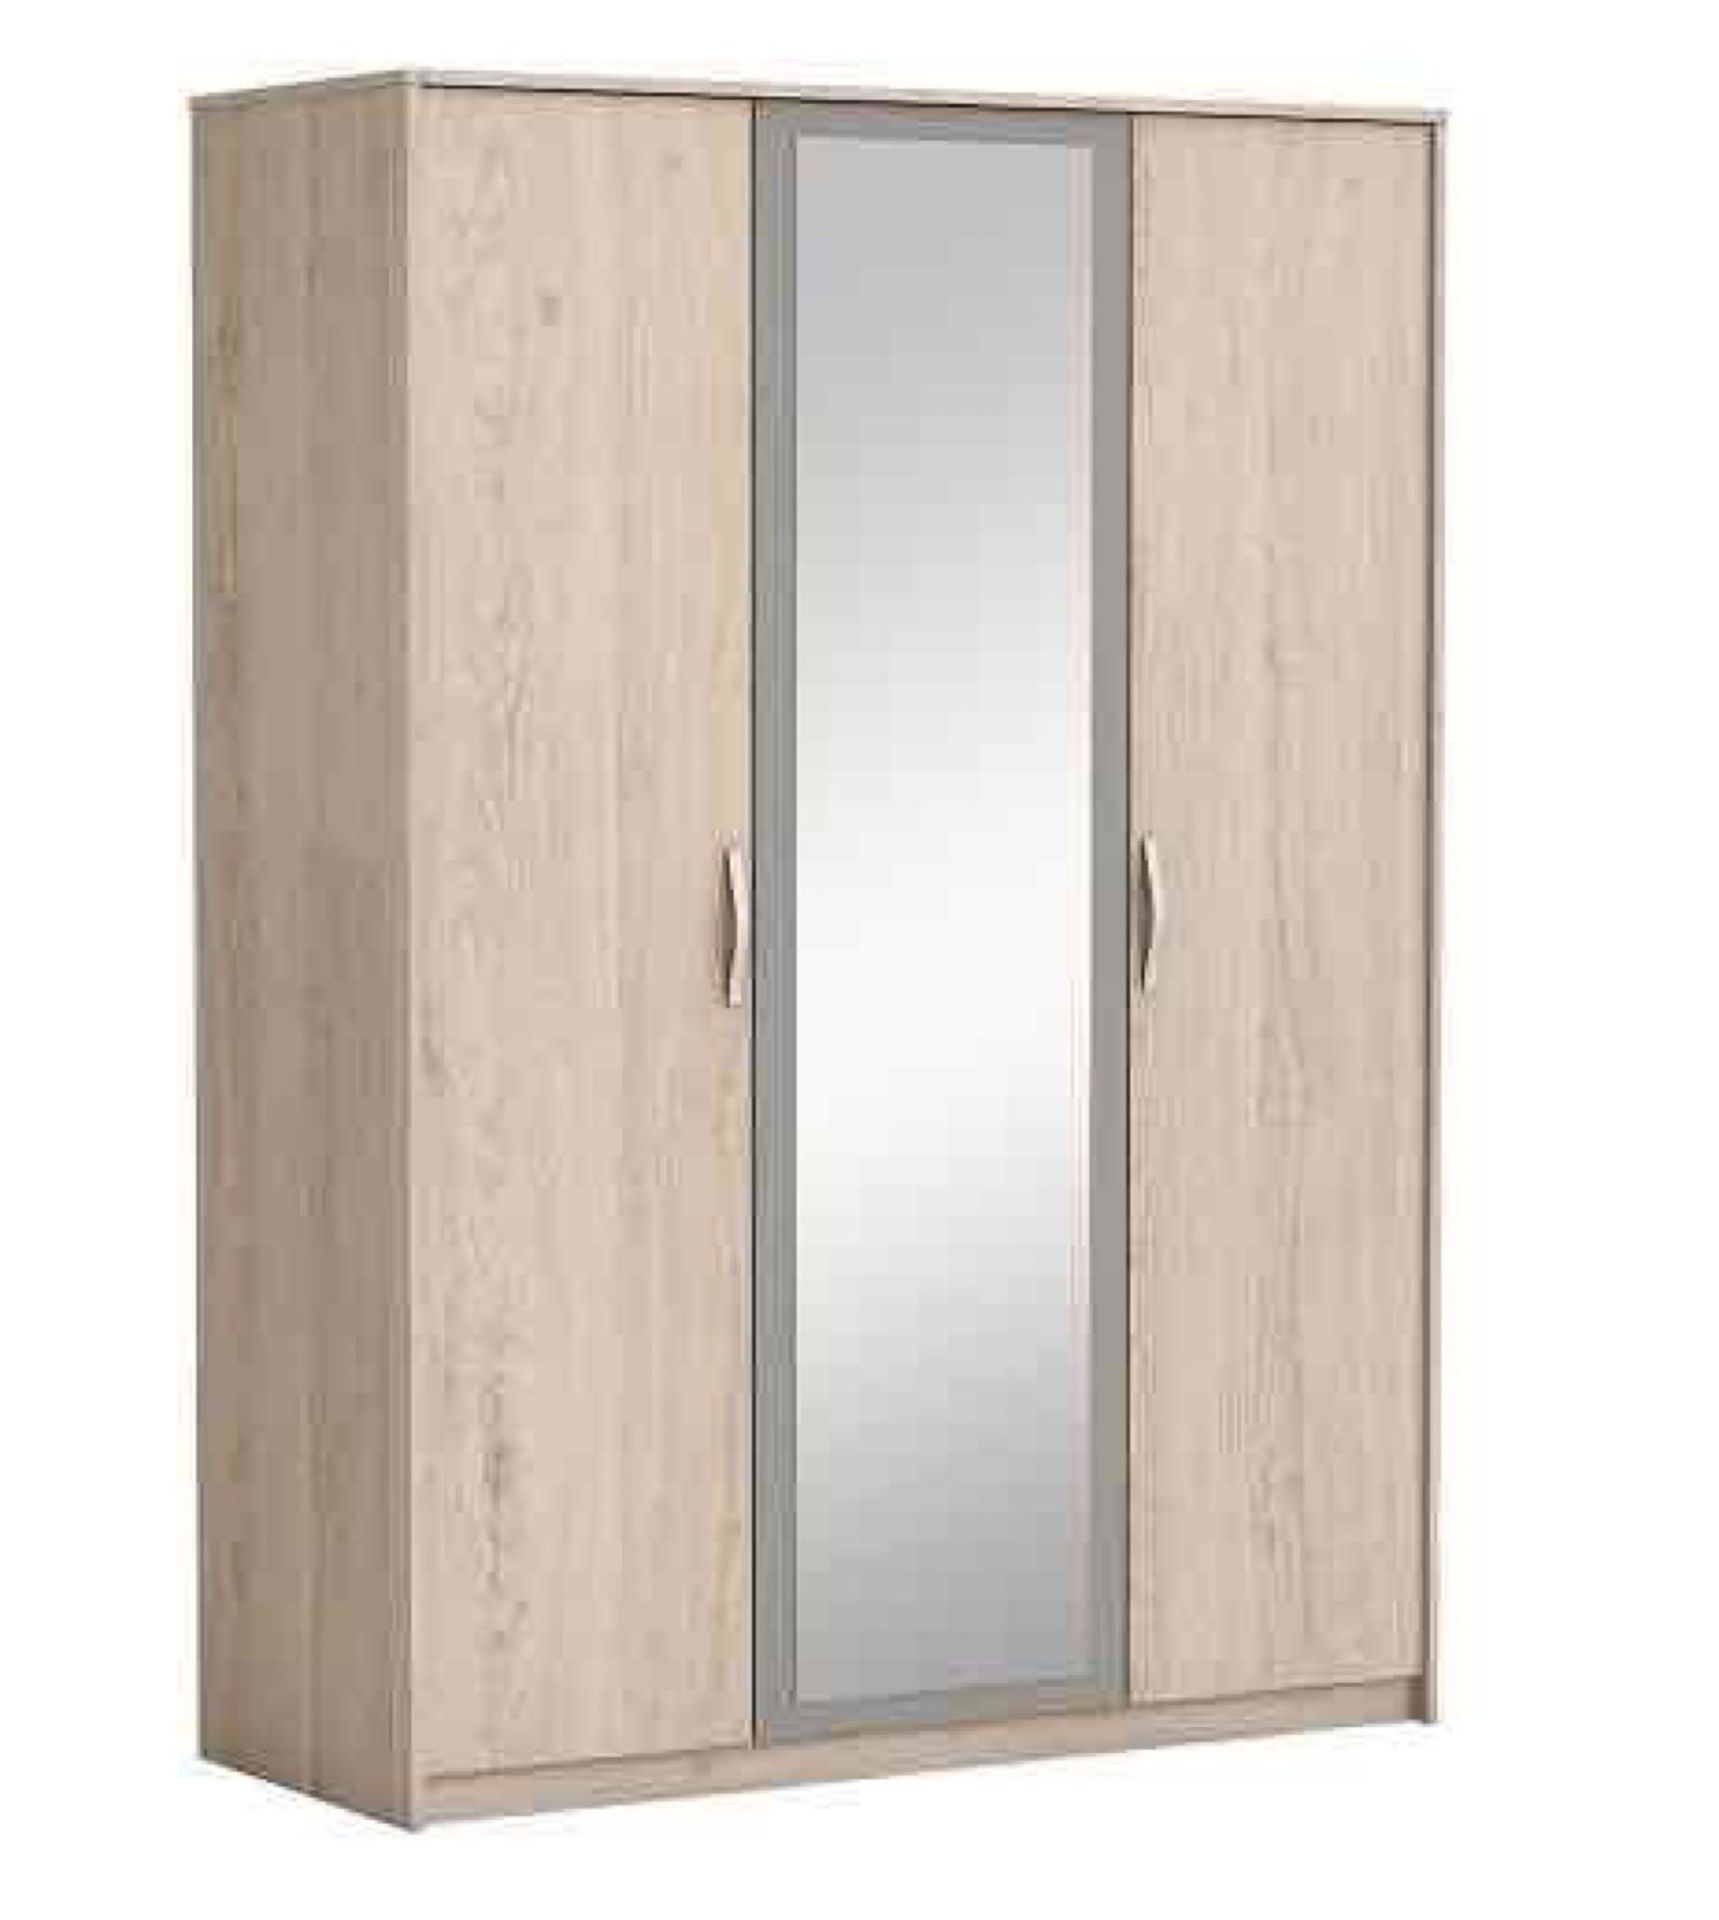 (Db) RRP £410 Lot To Contain 1 Boxed Magnum Mirror Wardrobe In Arizona Oak And Clay With 3 Doors. 19